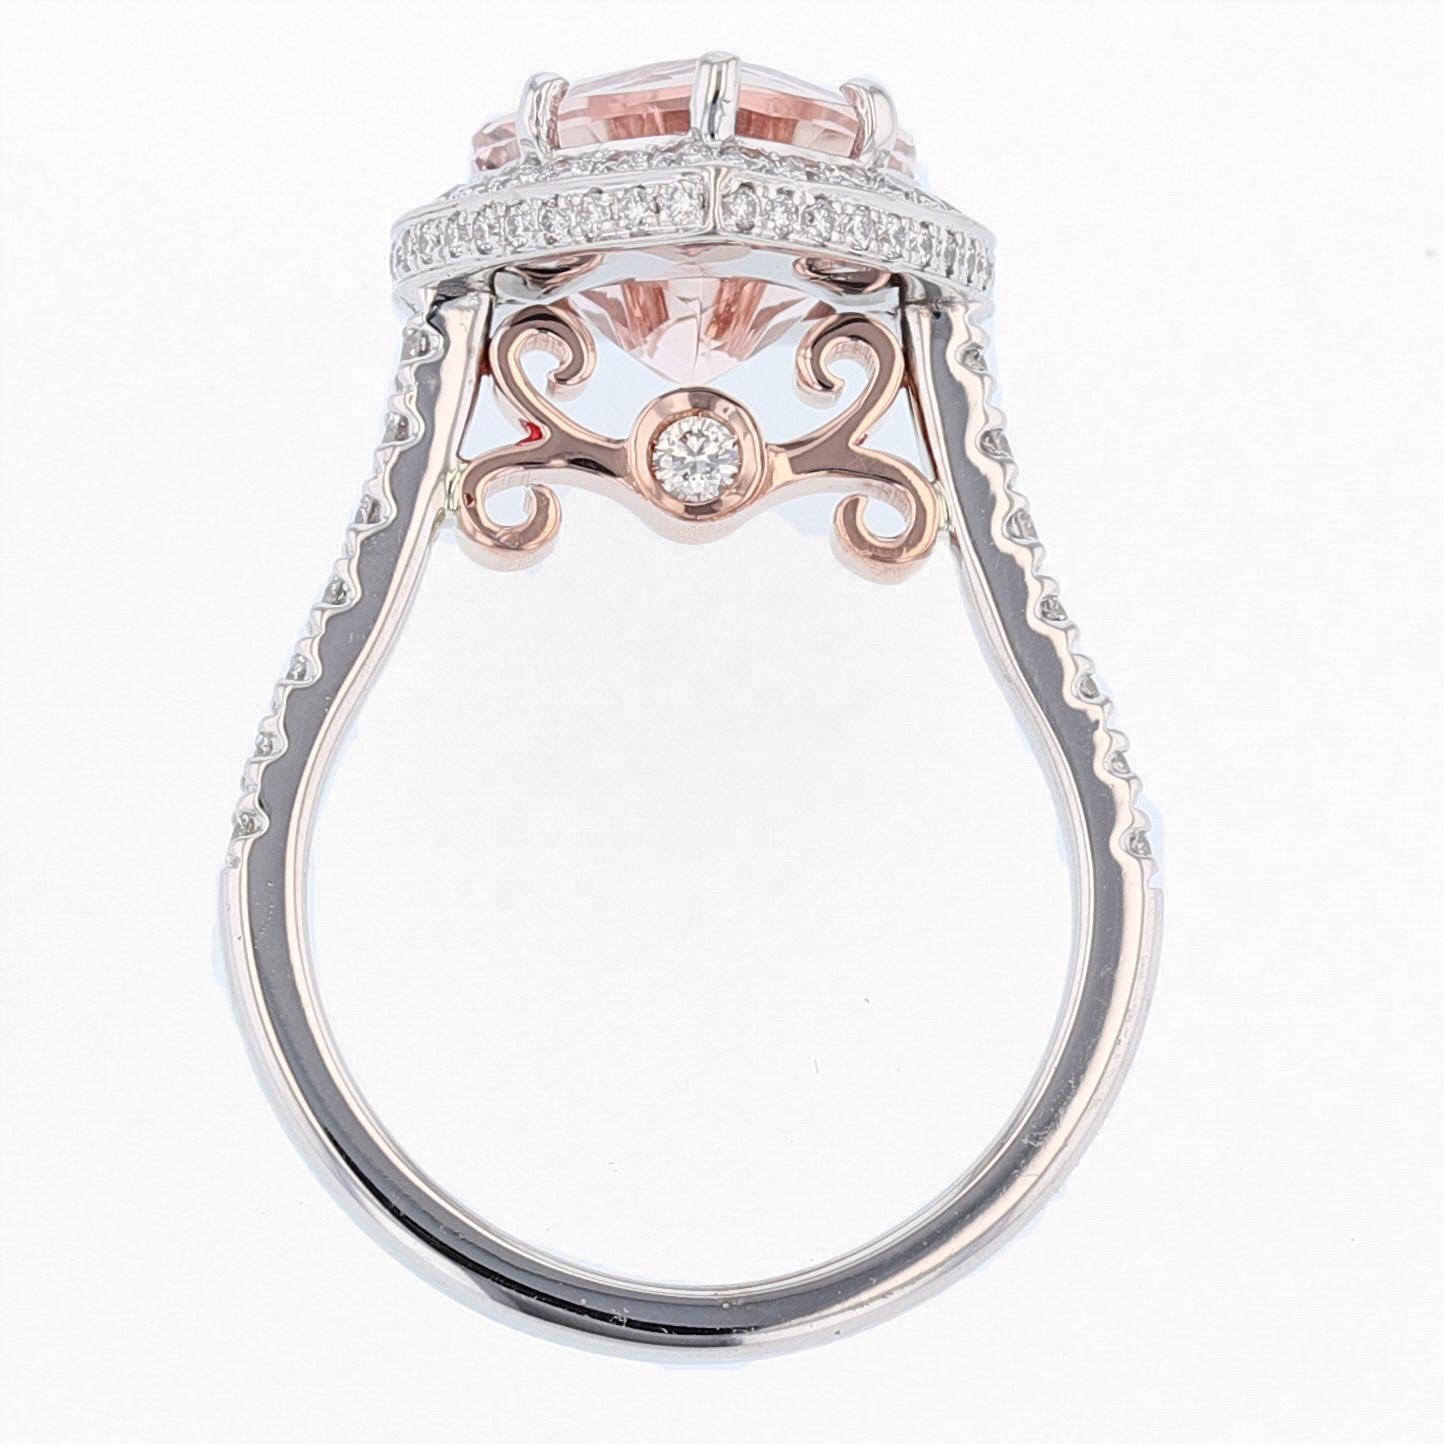 This ring is made in 14K white and rose gold featuring a heart shaped Morganite weighing 3.75CT that is prong set.  The ring also features 80 round cut diamonds that are prong set with a color grade (G) and clarity grade (SI1). 